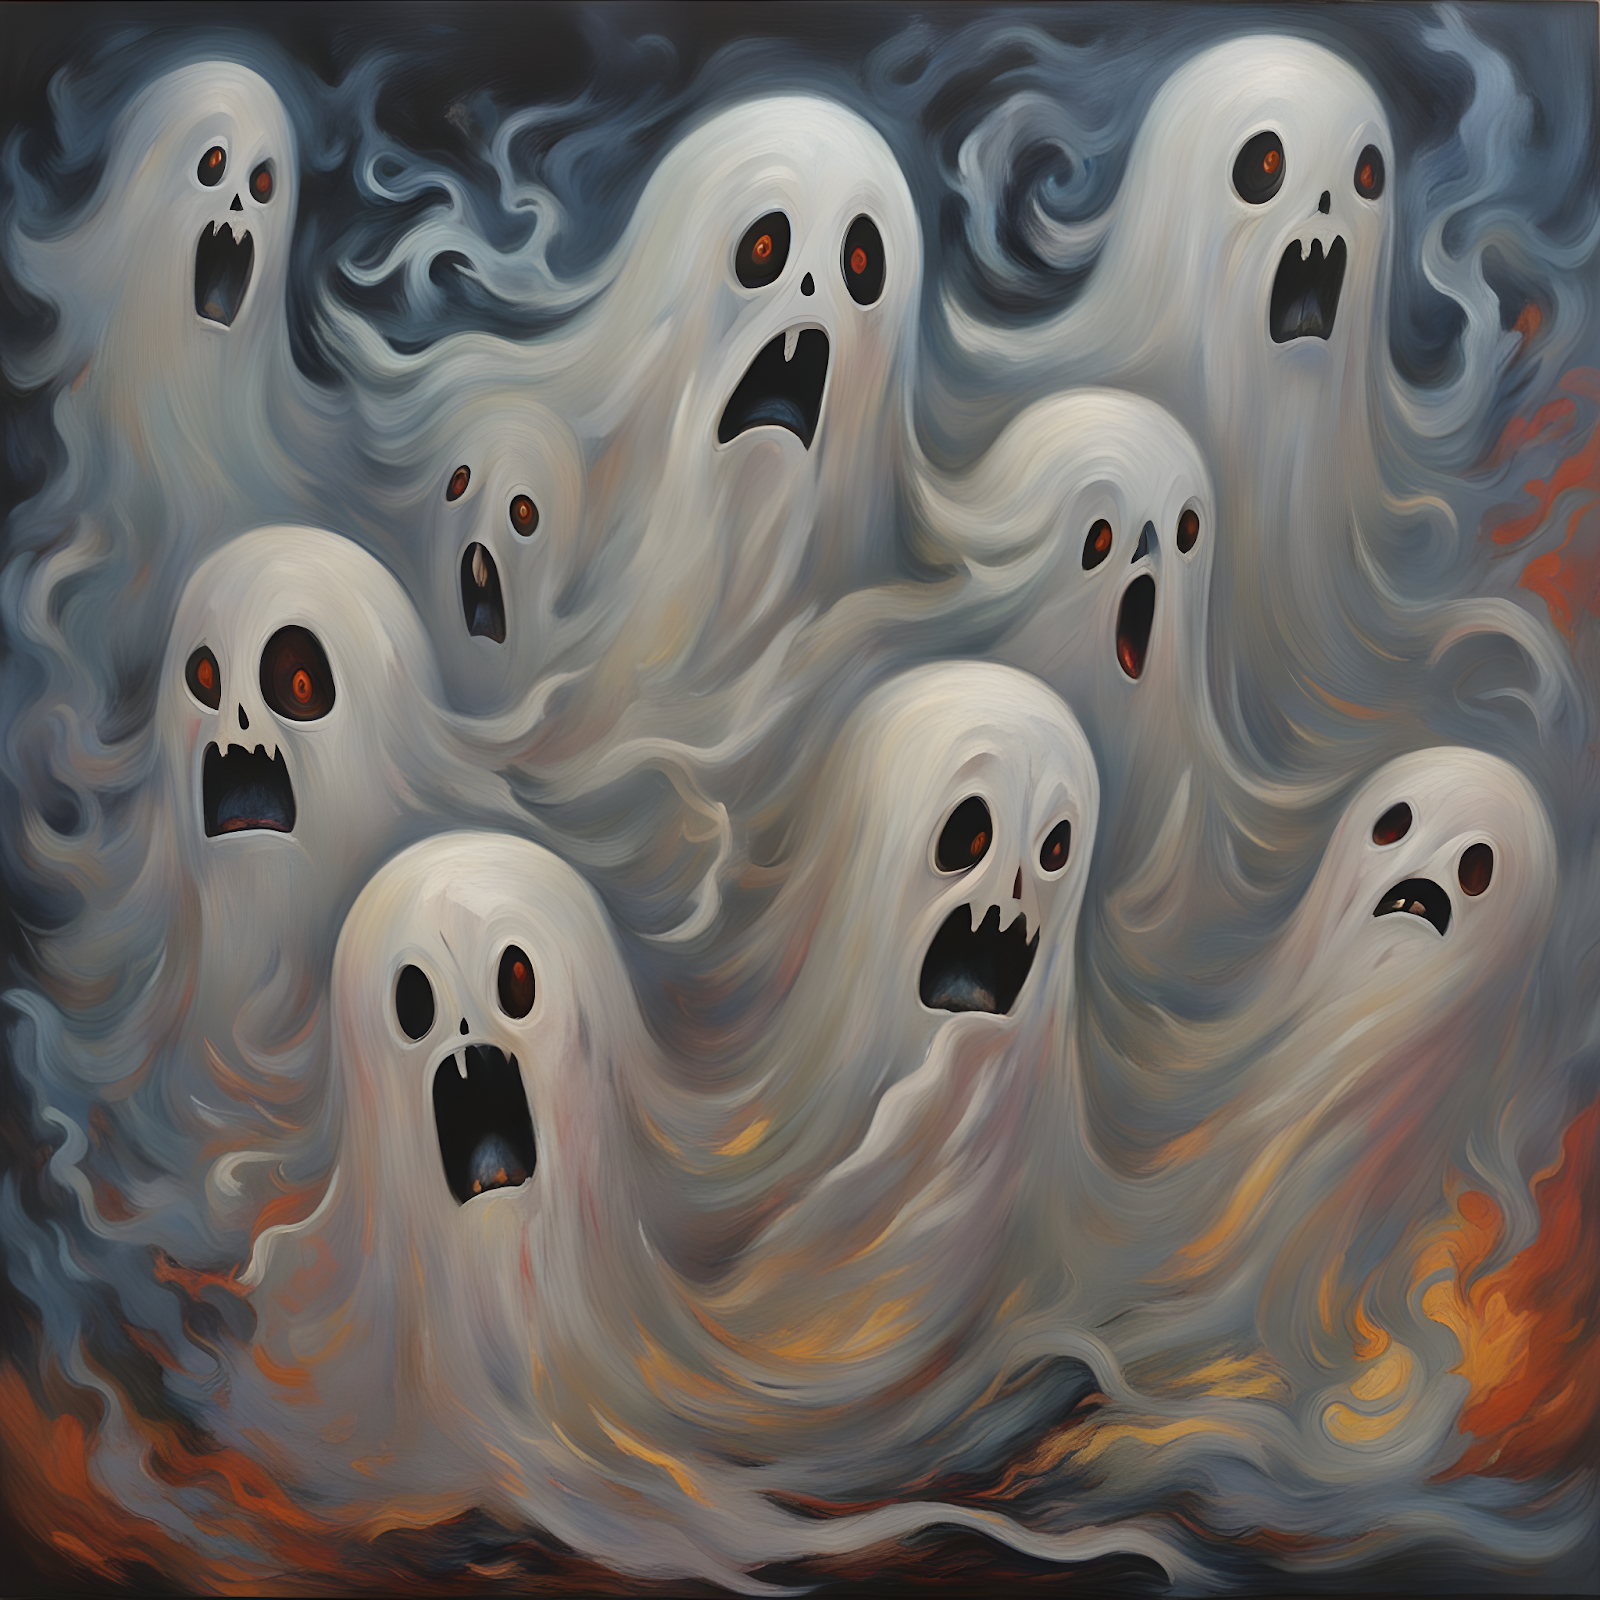 angry ghosts, generated by wepik.com